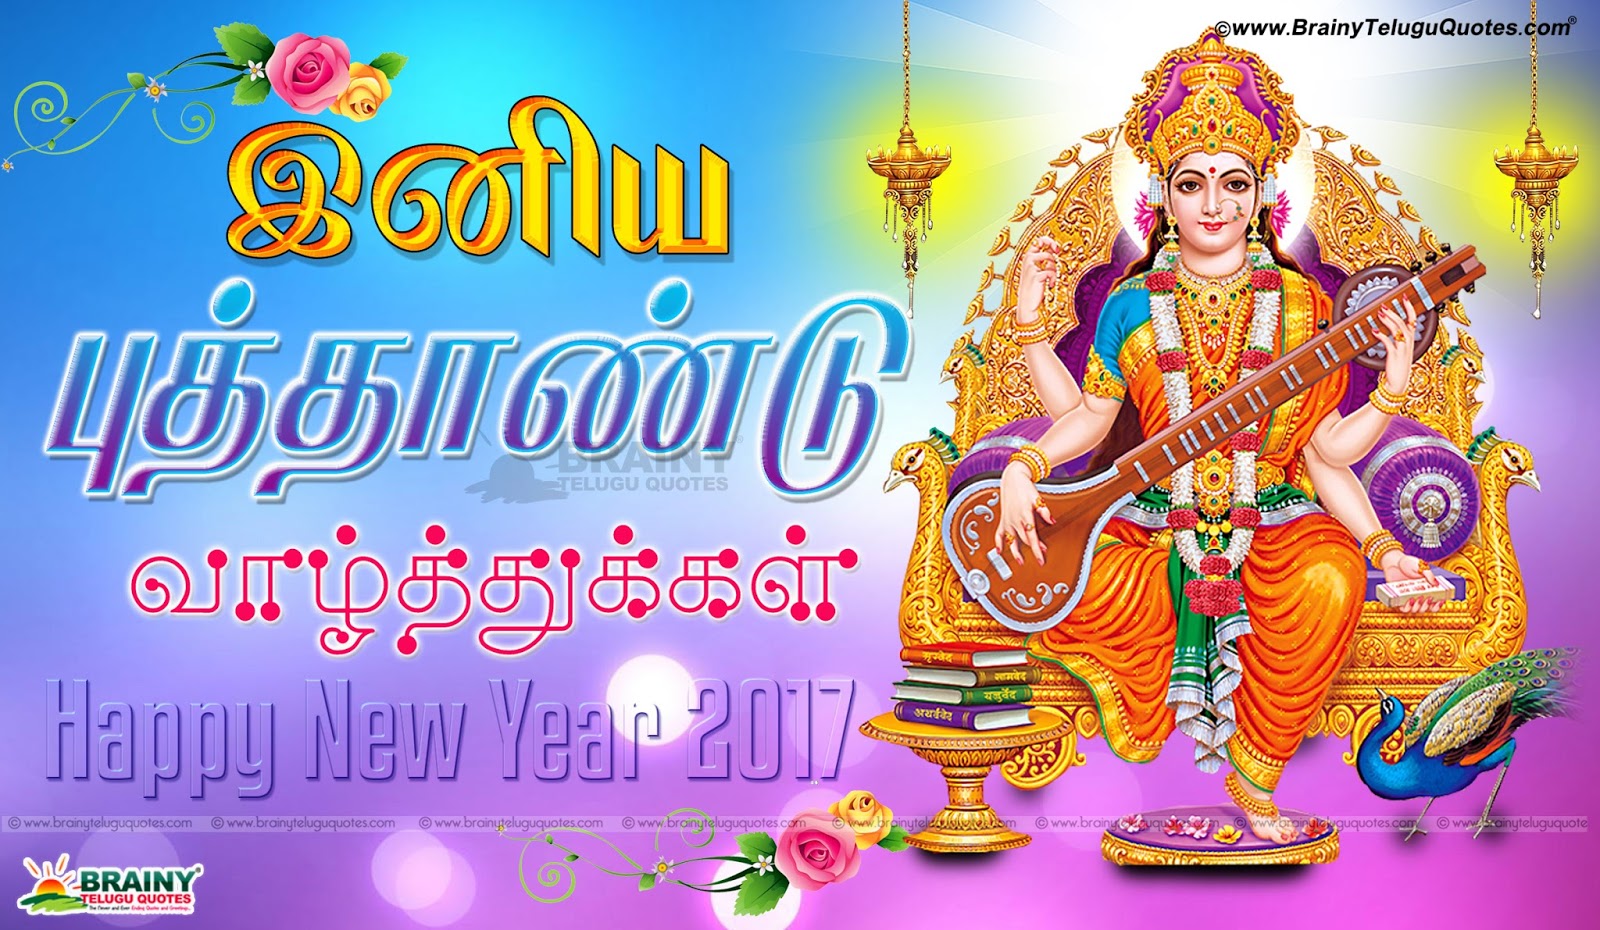 tamil new year wallpapers,blessing